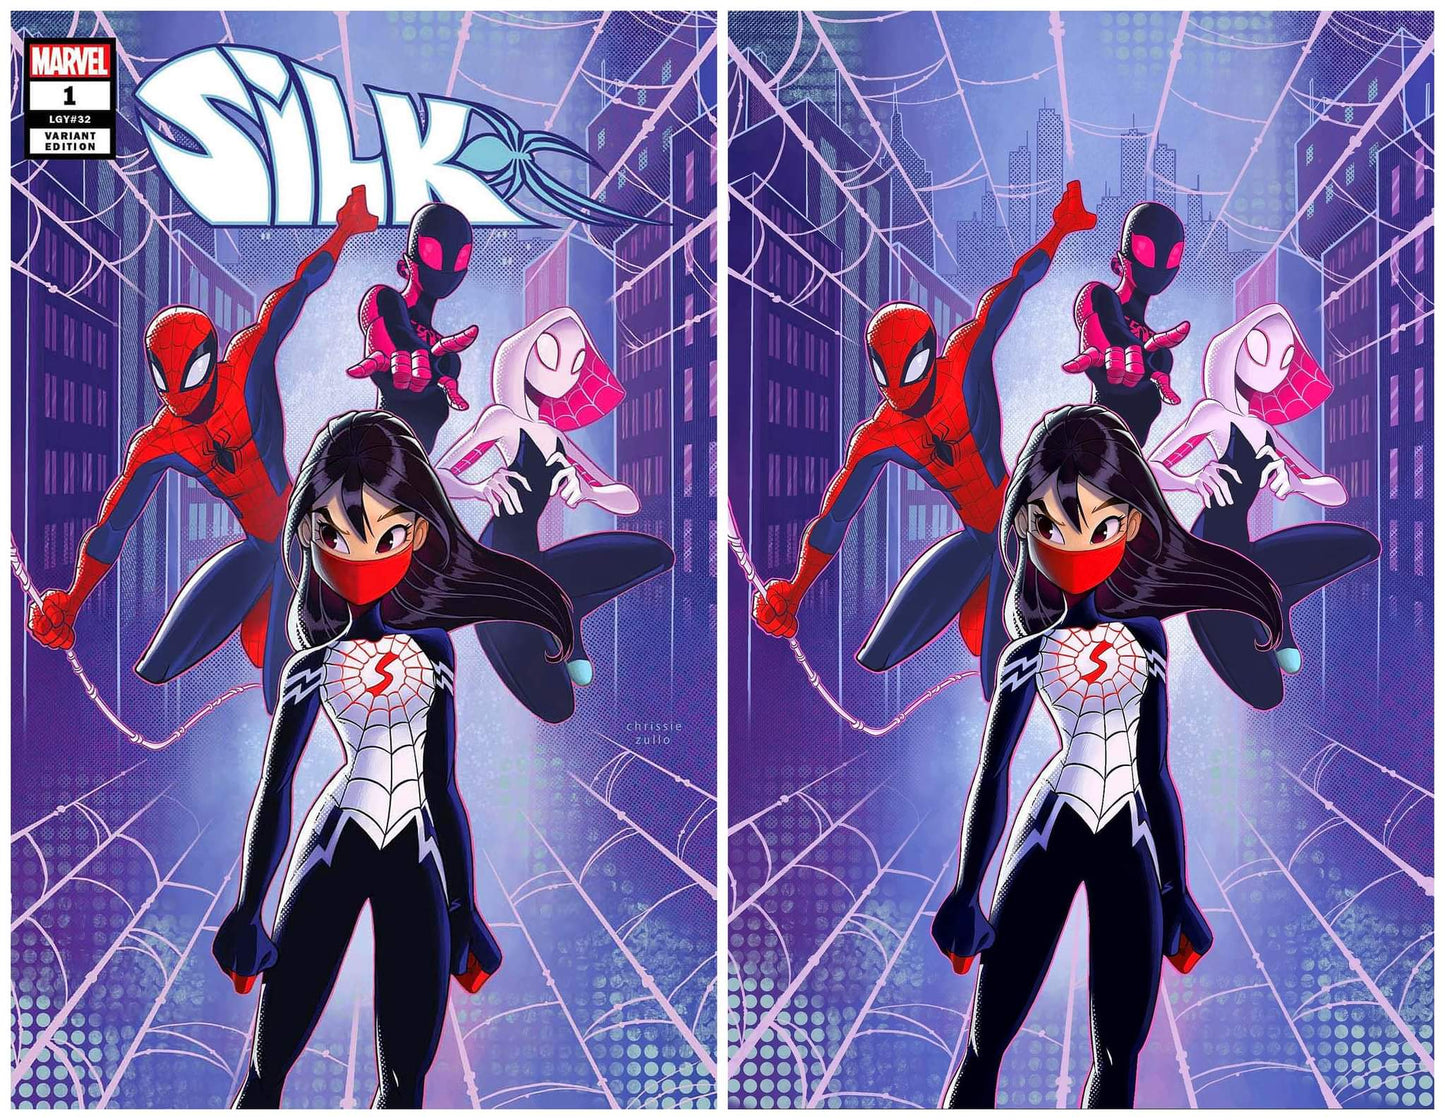 SILK #1 CHRISSIE ZULLO SPIDER-VERSE TRADE/VIRGIN VARIANT SETS LIMITED TO 500 SETS WITH COA